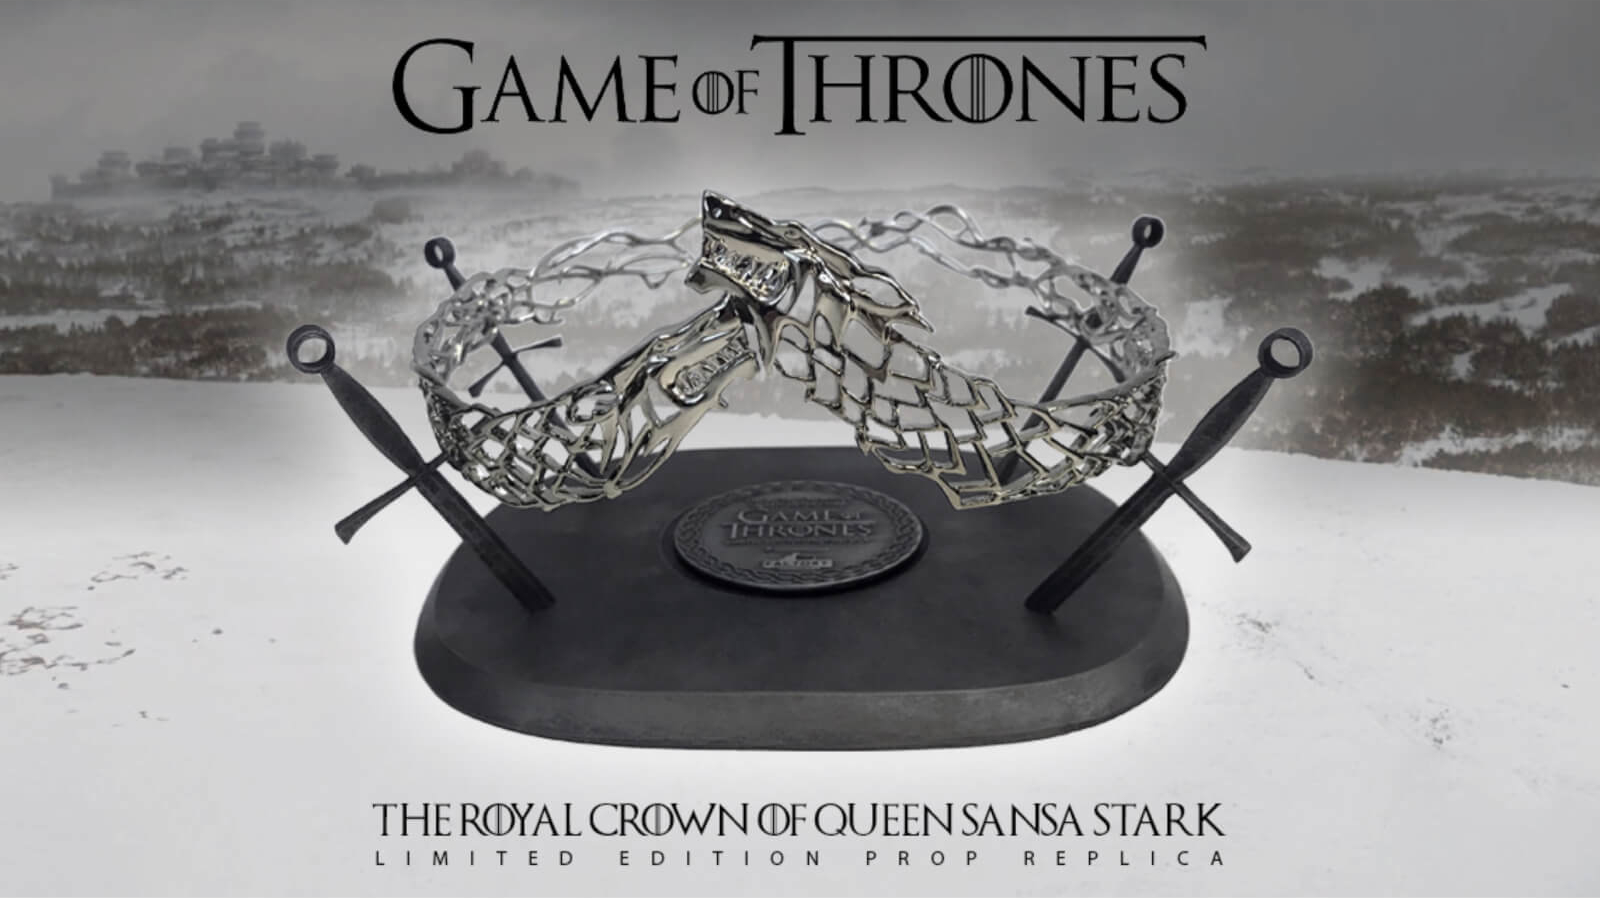 Image of the Sansa Stark Crown with text on screen reading Game of Thrones, The Royal crown of Queen Sansa Stark. Limited edition prop replica